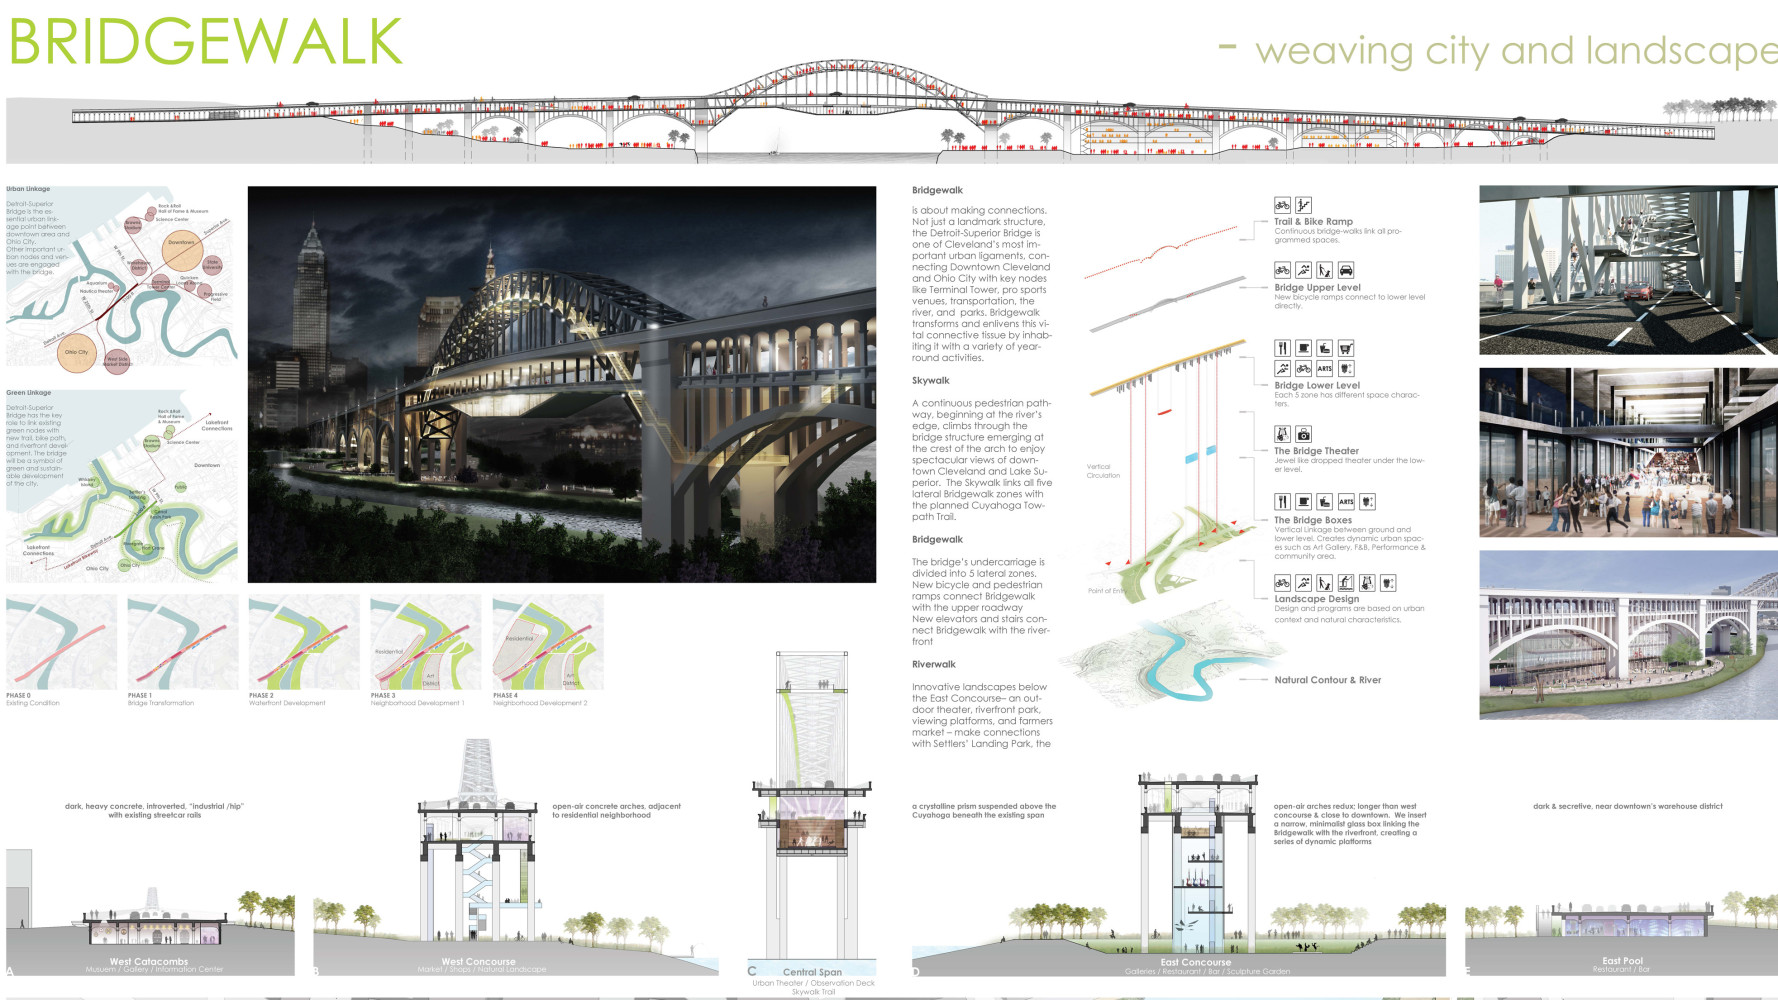 Cleveland International Design Competition, by Archilier Architecture